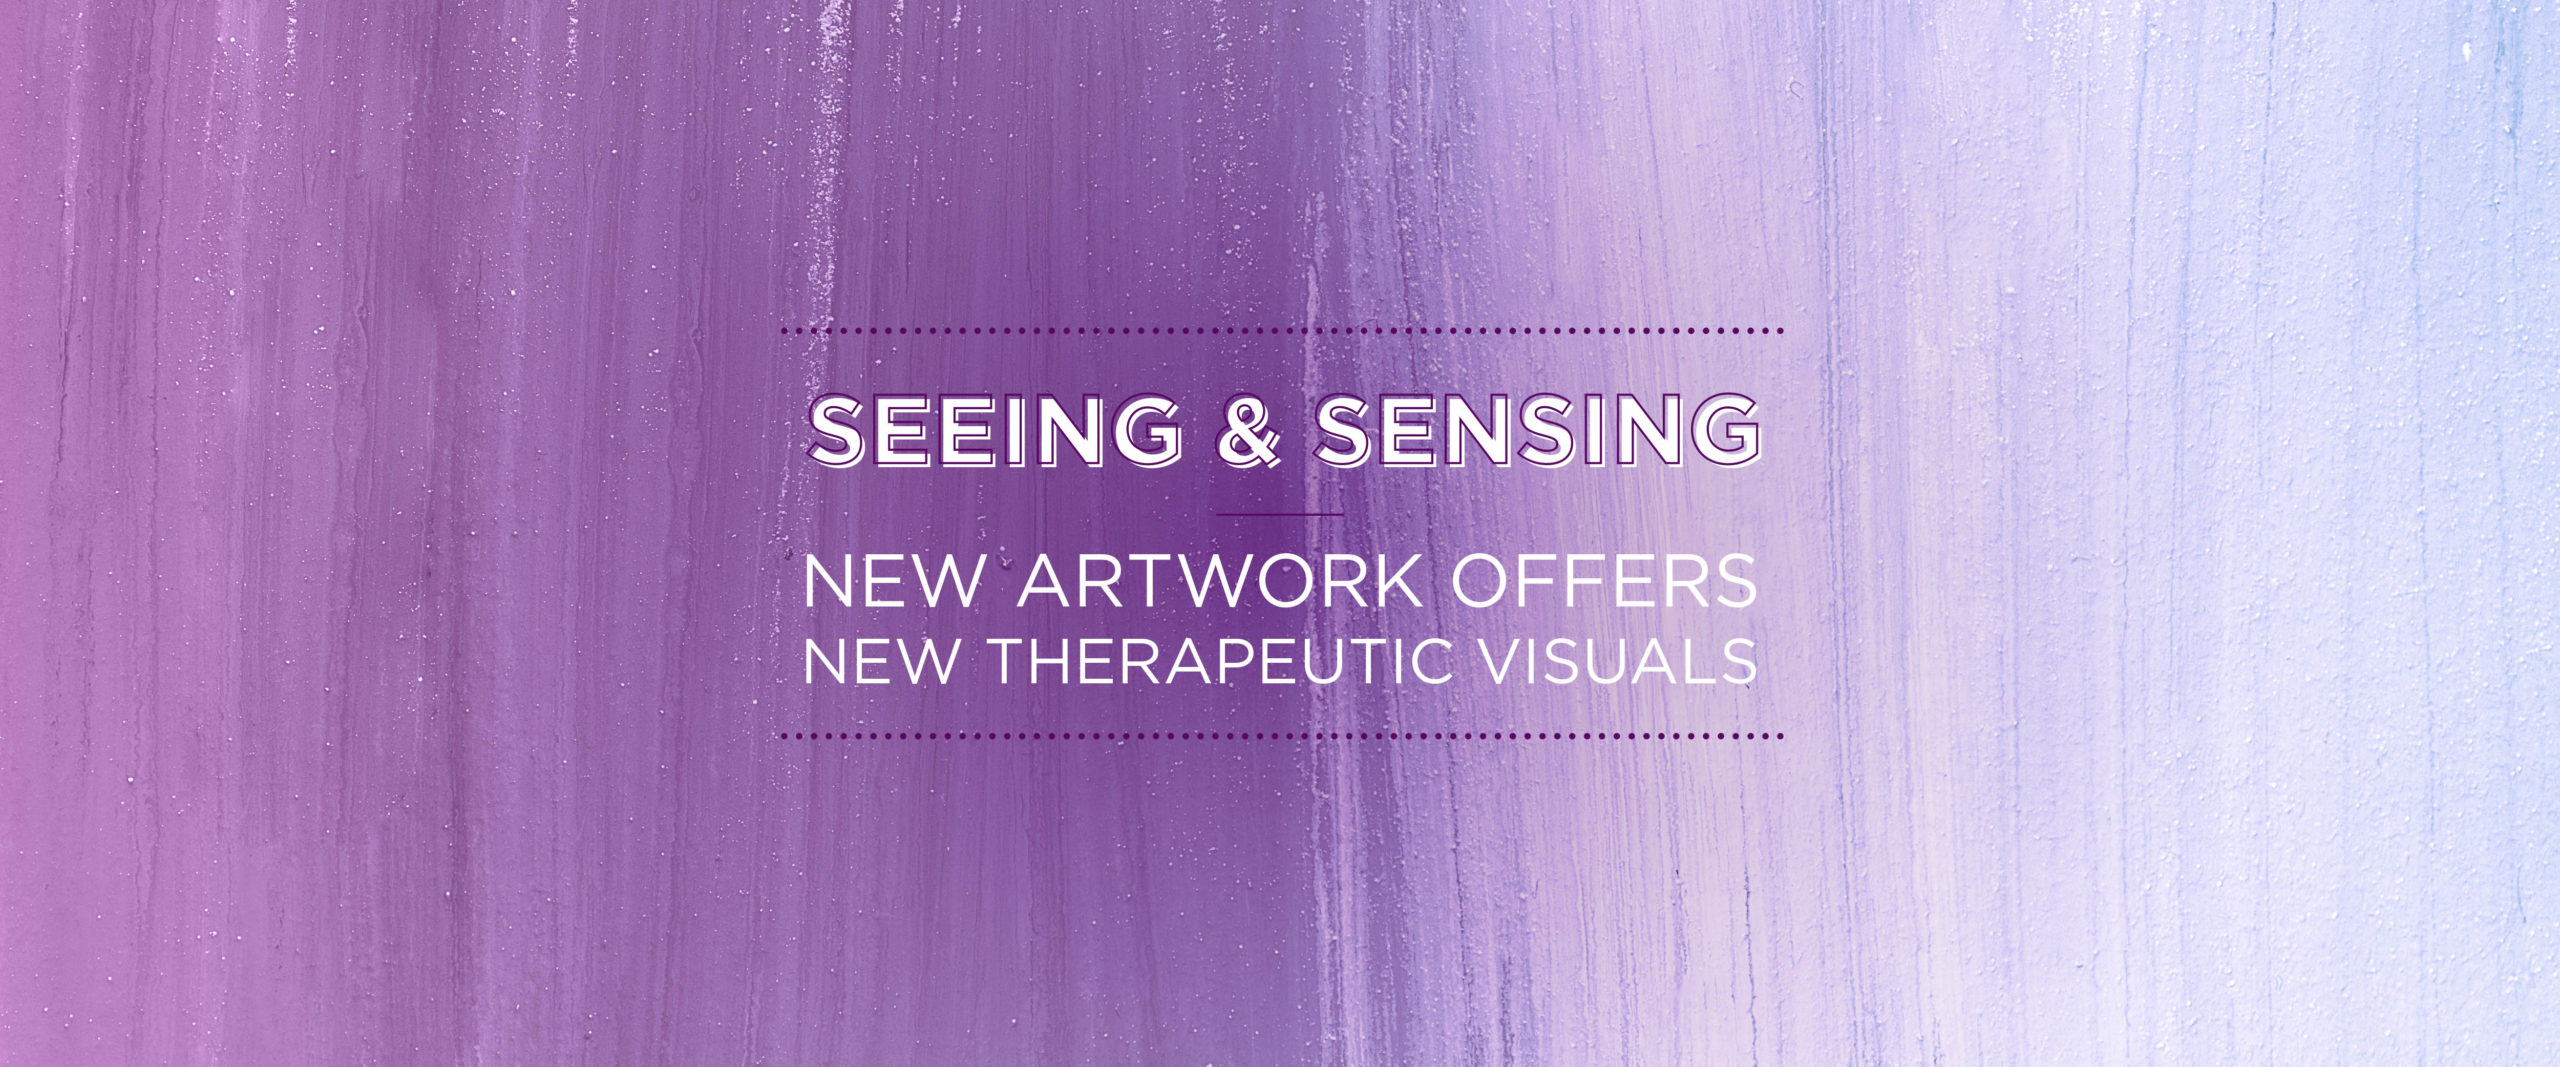 Seeing & Sensing: New artwork offers new therapeutic visuals